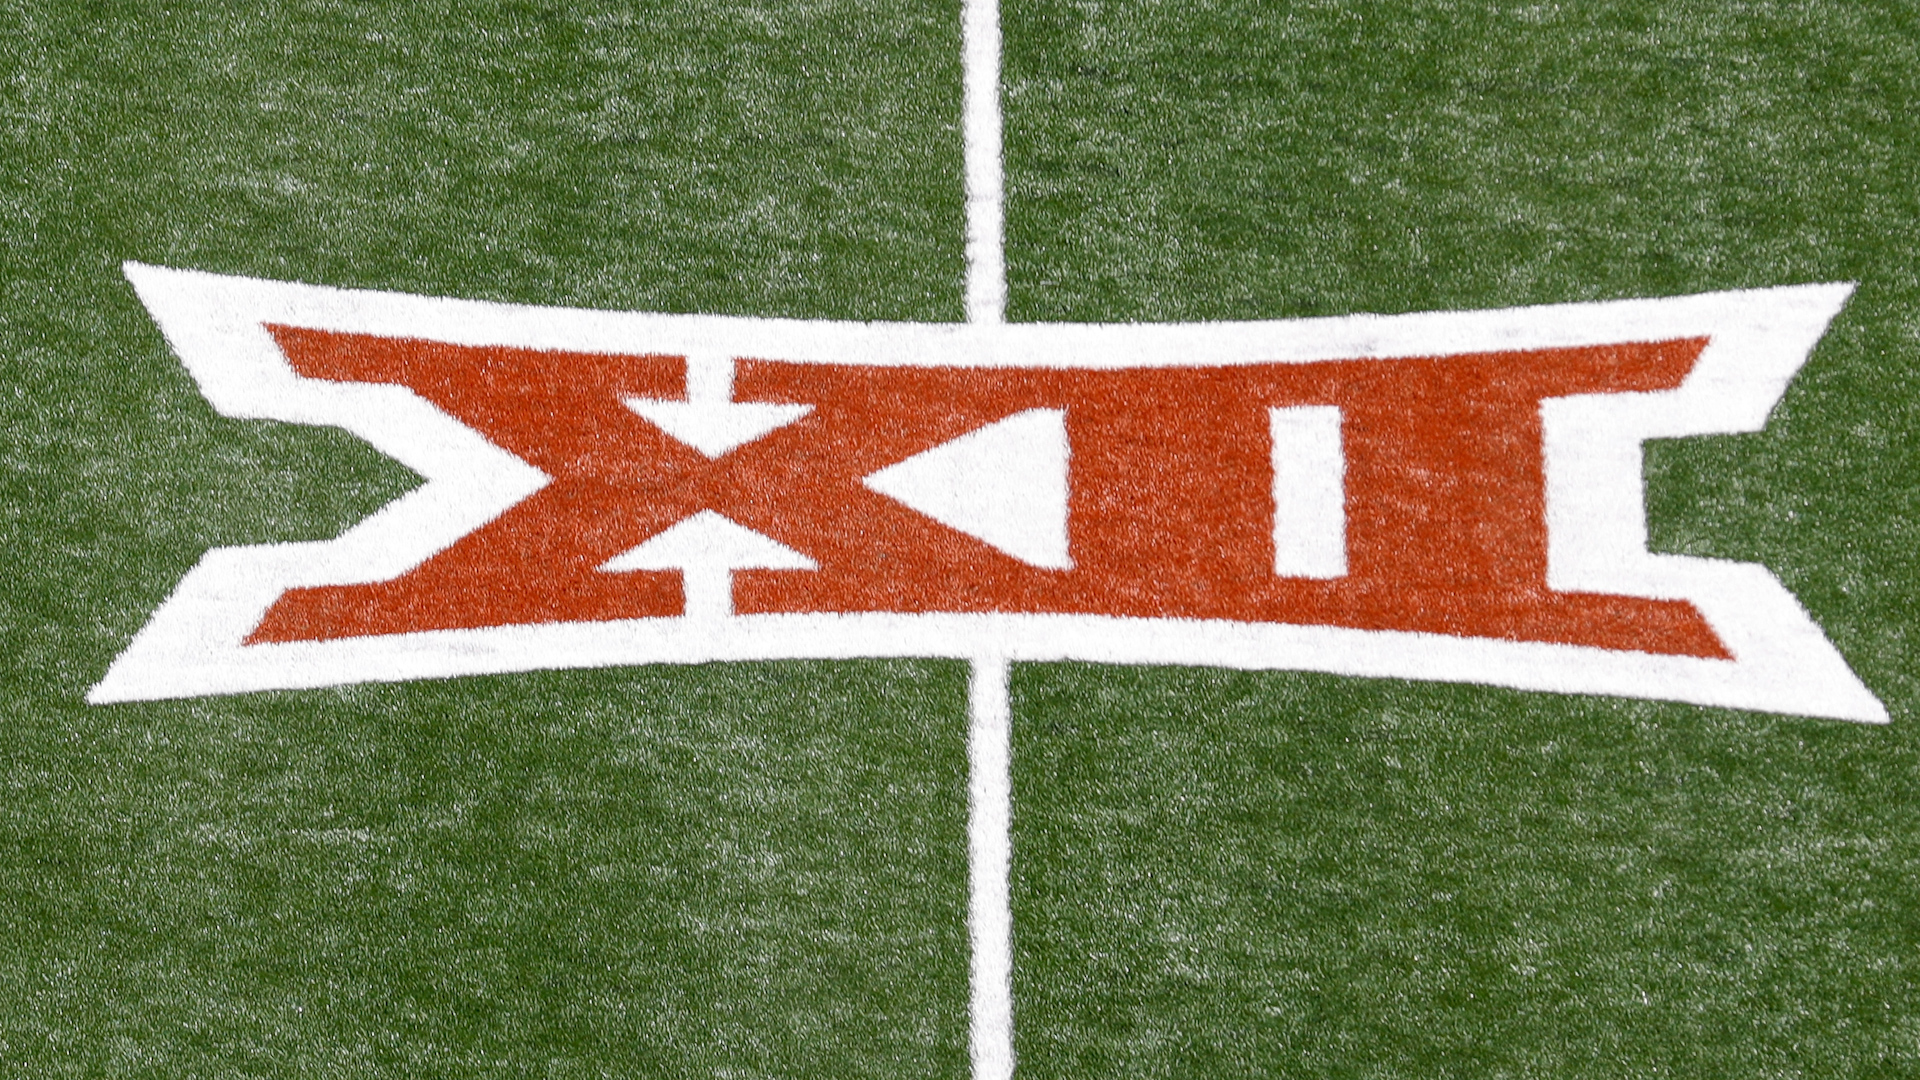 Reports suggest the Big 12 conference is exploring selling its naming rights, potentially becoming "The Allstate 12" in a landmark deal.